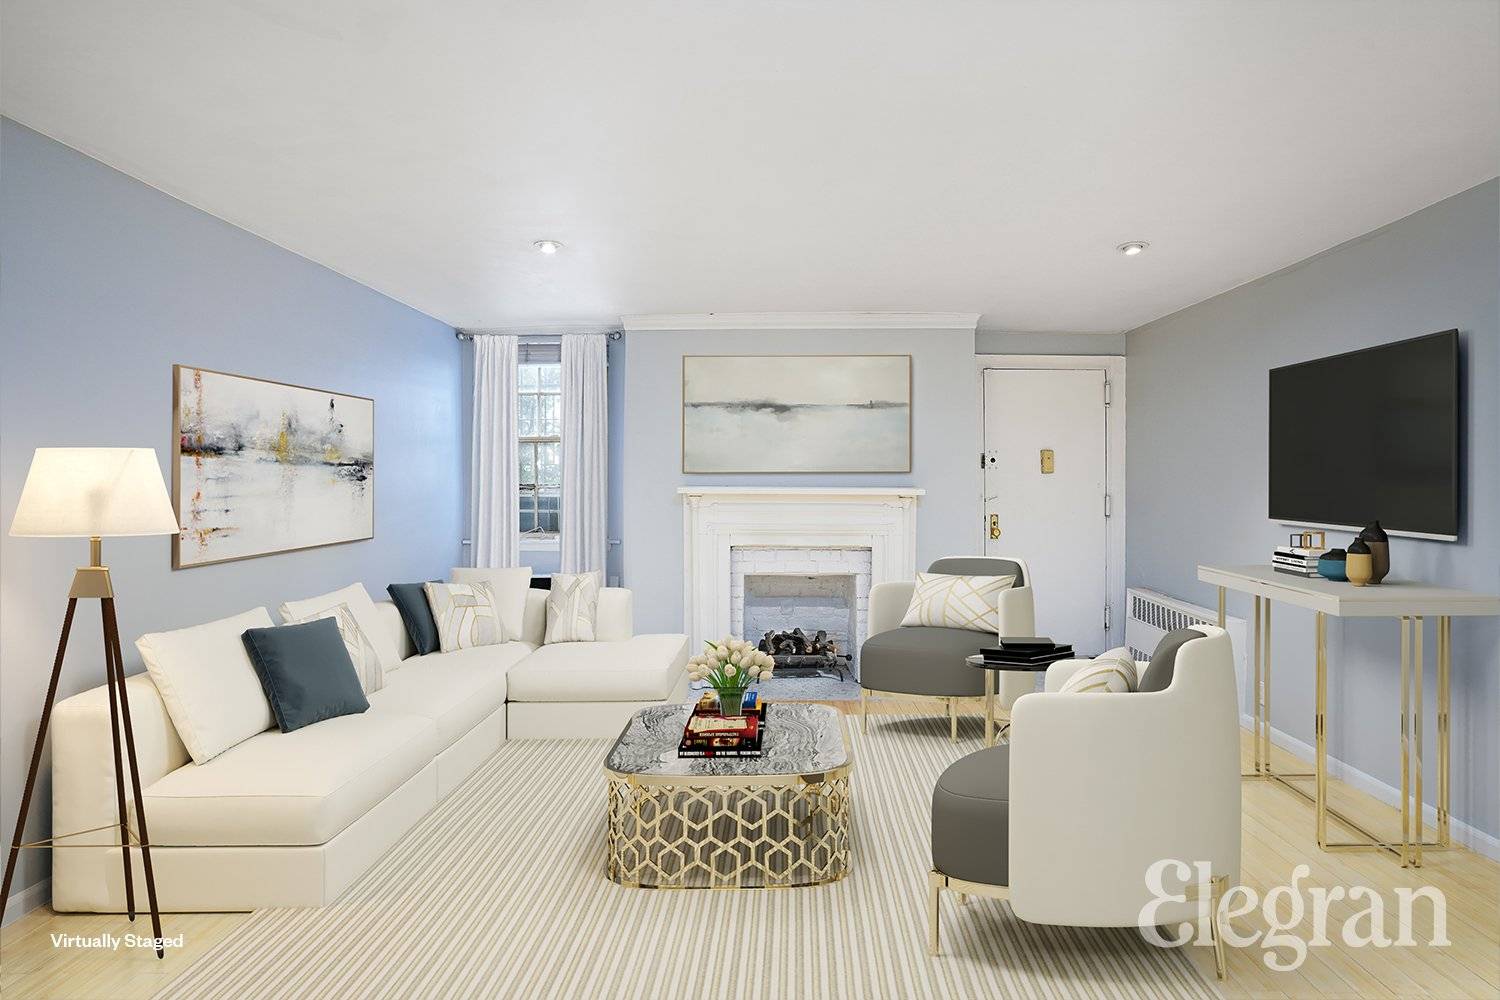 Enjoy townhouse living in this private garden apartment nestled on one of the best blocks in Chelsea.